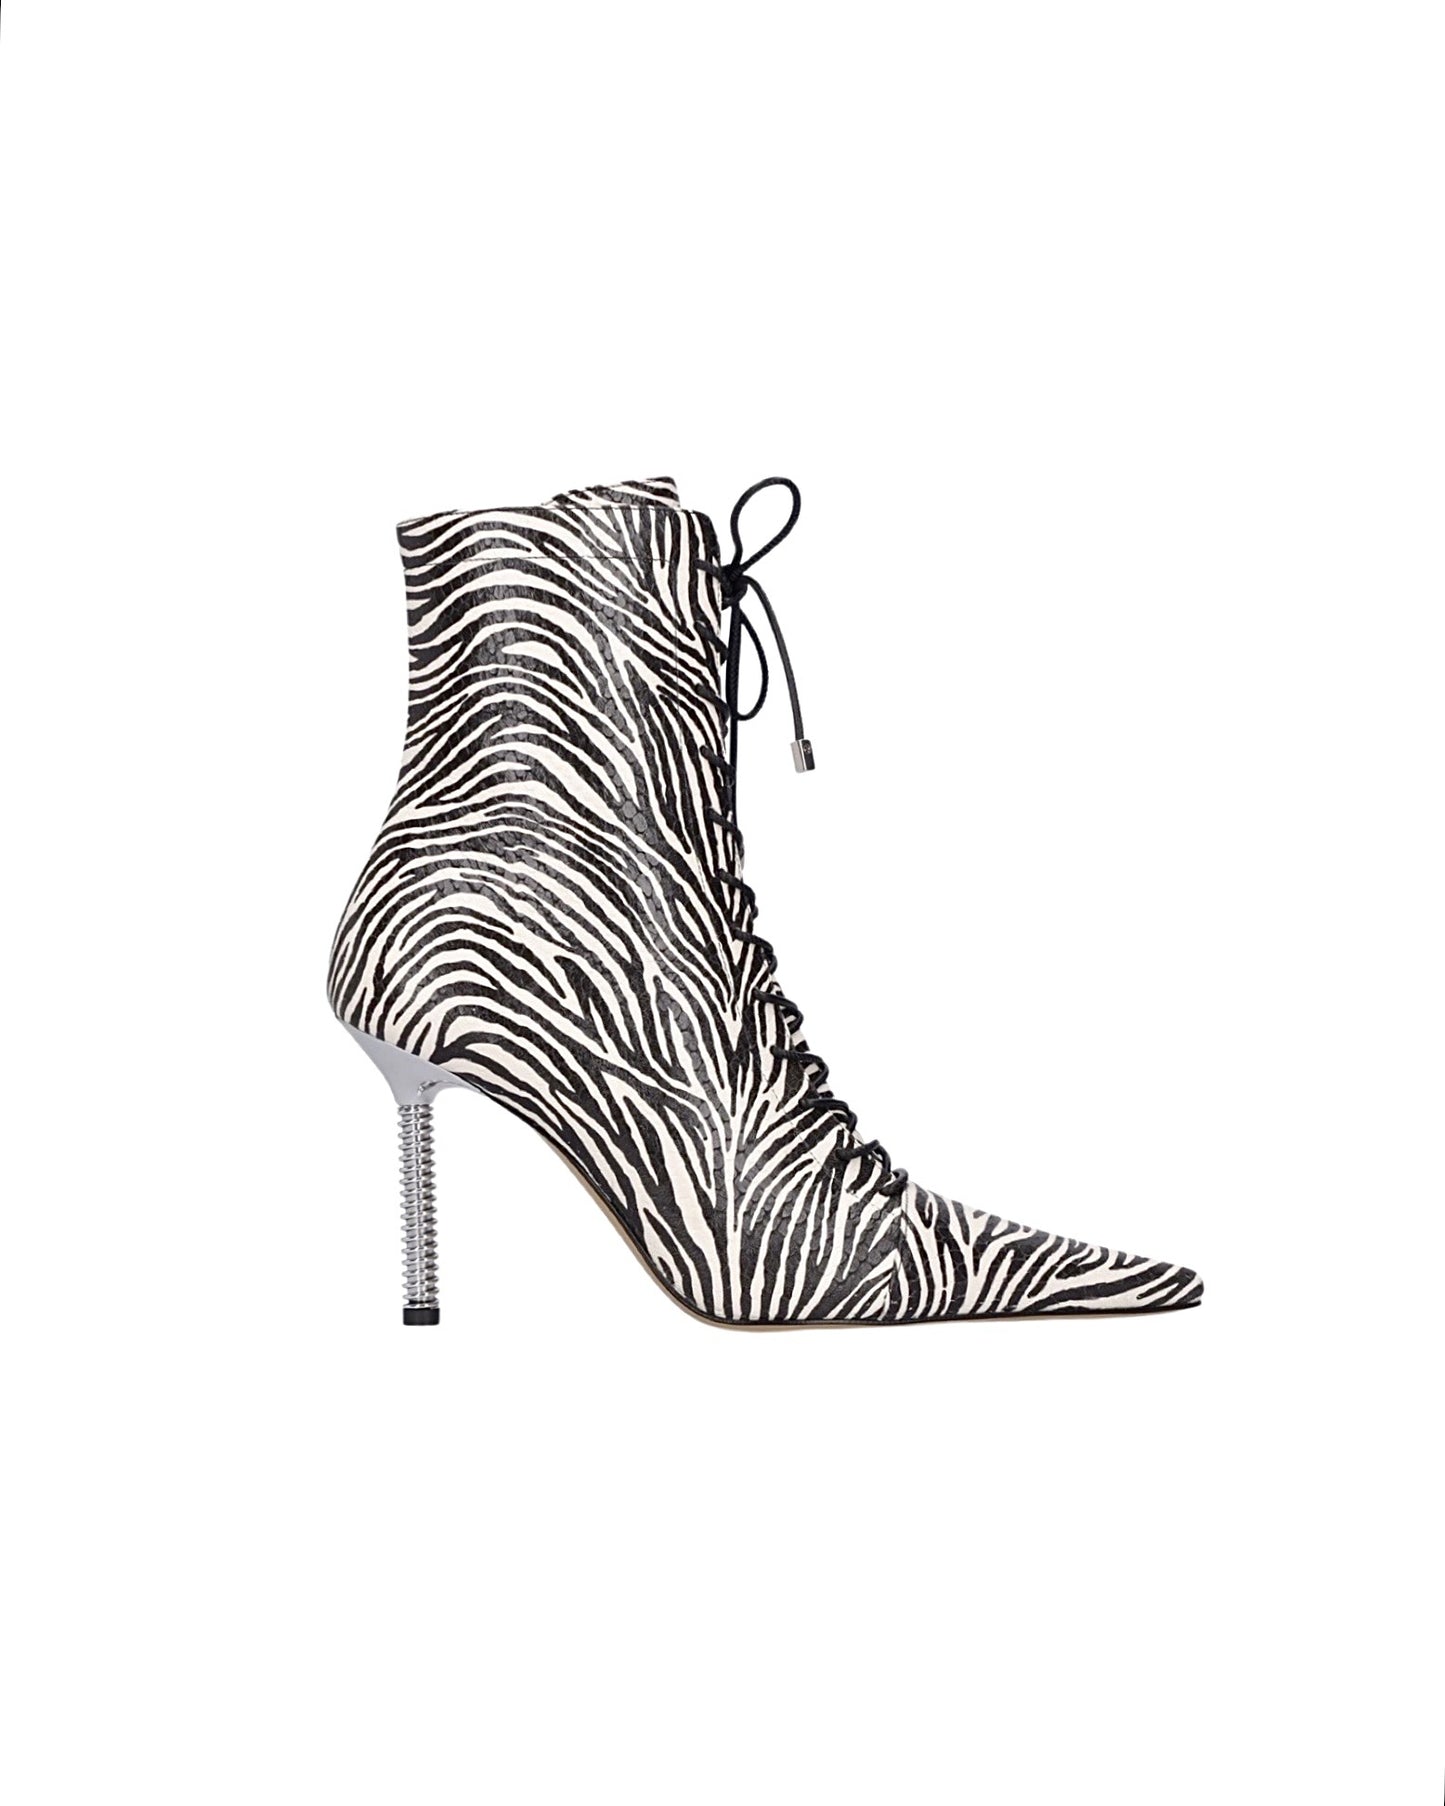 SALE Zebra Print Leather Lace up Ankle Boot was $1795